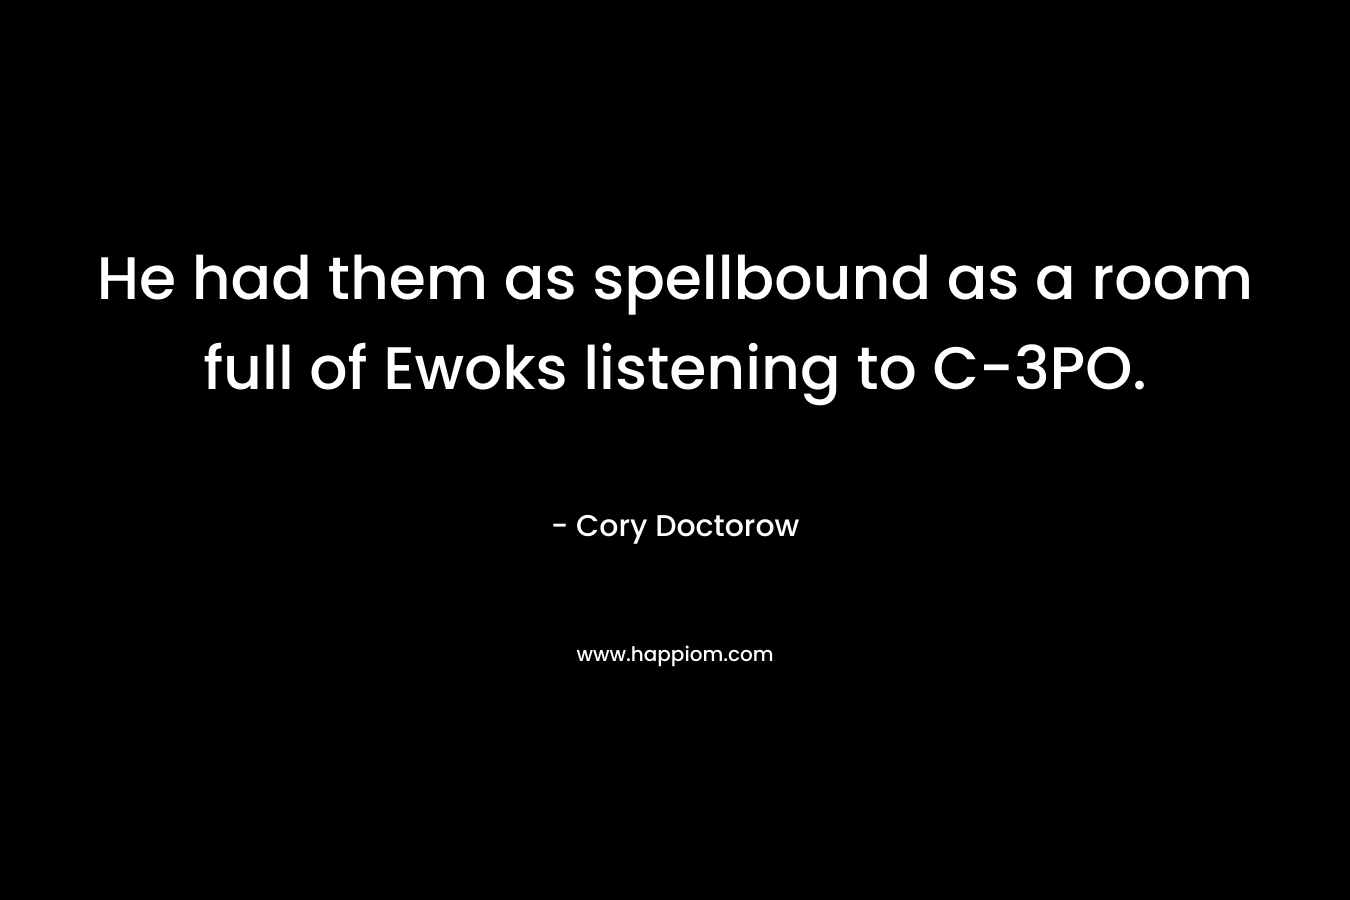 He had them as spellbound as a room full of Ewoks listening to C-3PO. – Cory Doctorow